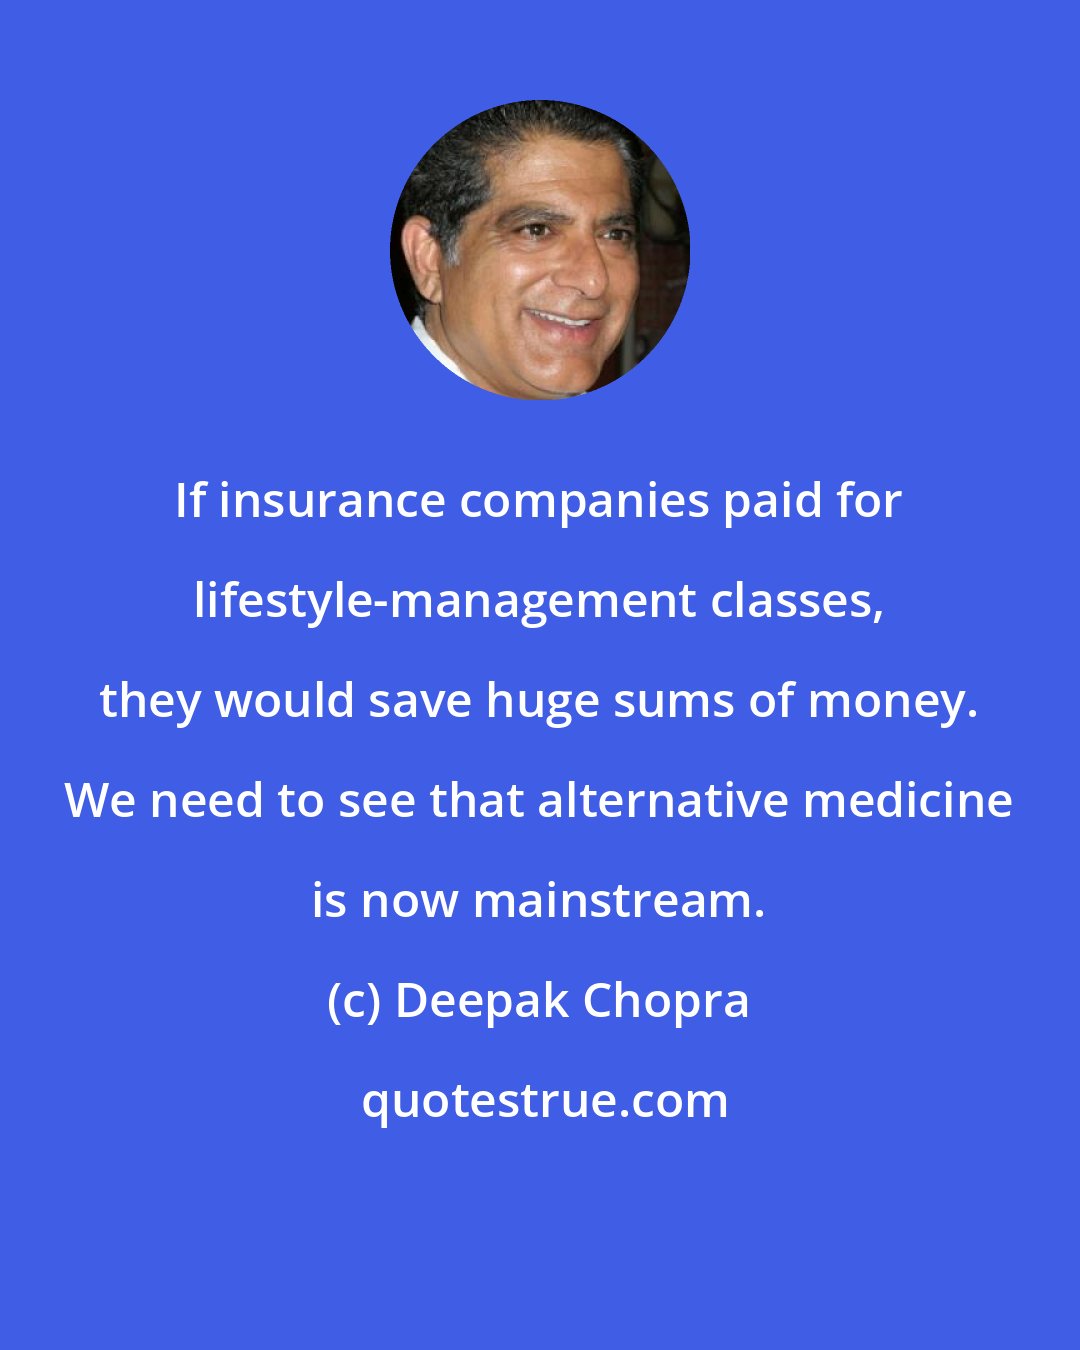 Deepak Chopra: If insurance companies paid for lifestyle-management classes, they would save huge sums of money. We need to see that alternative medicine is now mainstream.